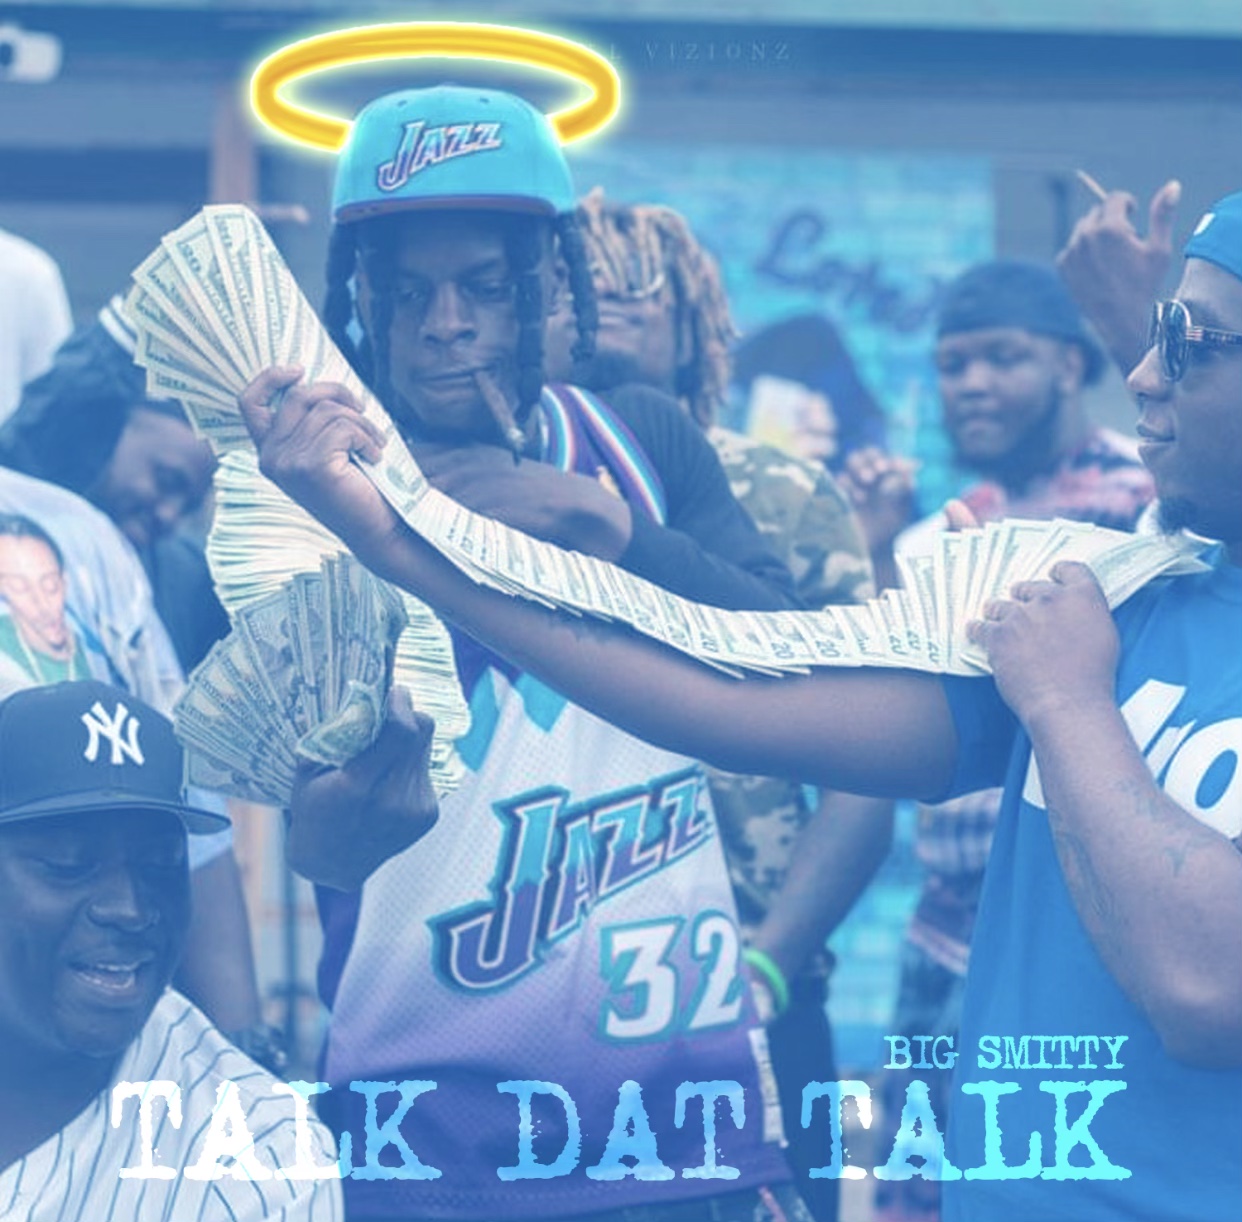 Georgia rising star Big Smitty is back with another banger, “Talk Dat Talk” | @BigSmittyMusic @AsnMediaGroup